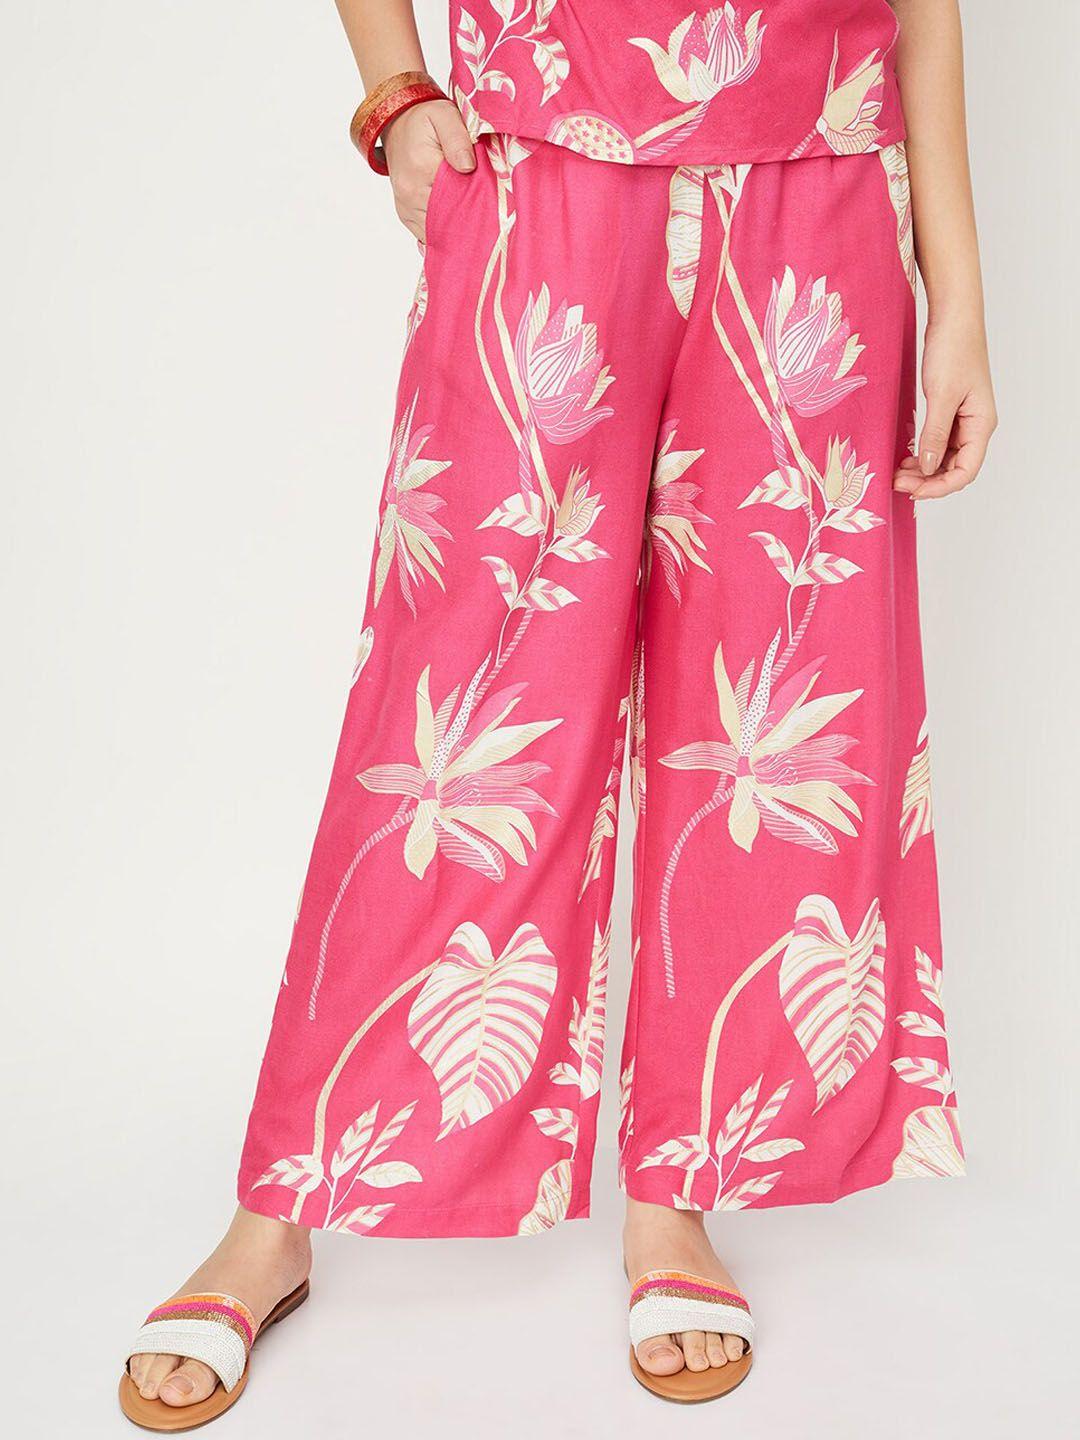 max women mid-rise floral printed culottes trousers